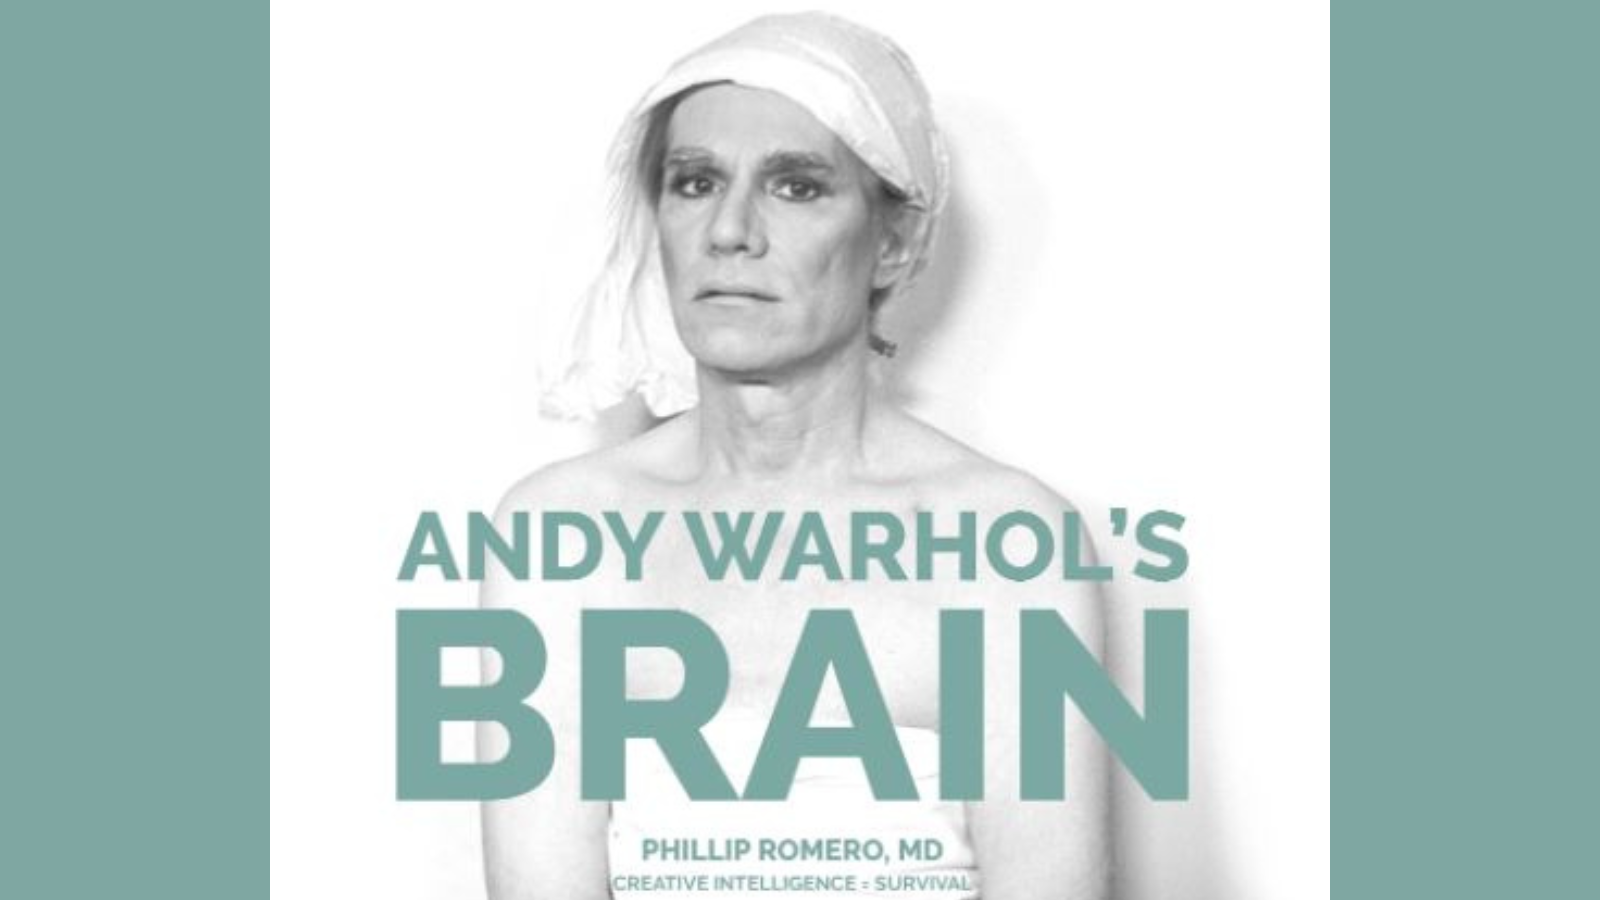 "Andy used creativity as his therapy" – how to channel creative intelligence like Andy Warhol